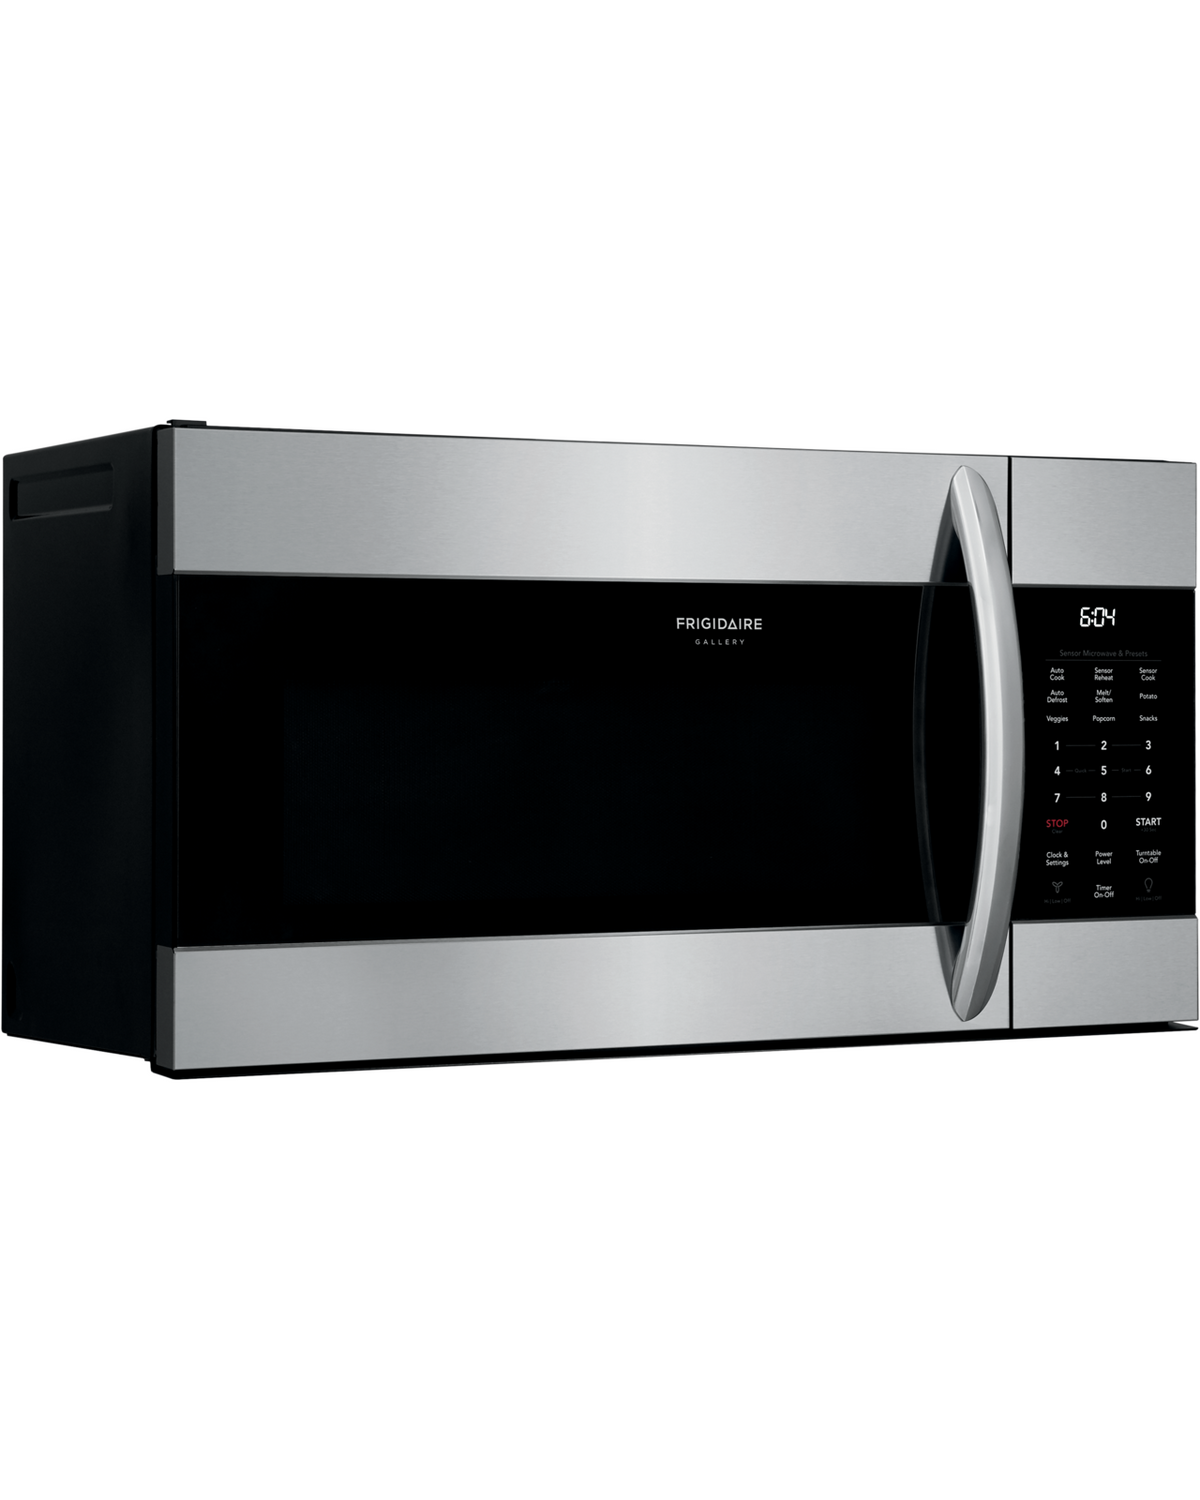 Frigidaire Gallery FGMV17WNVF 1.7 Cu. Ft. Over-The-Range Microwave